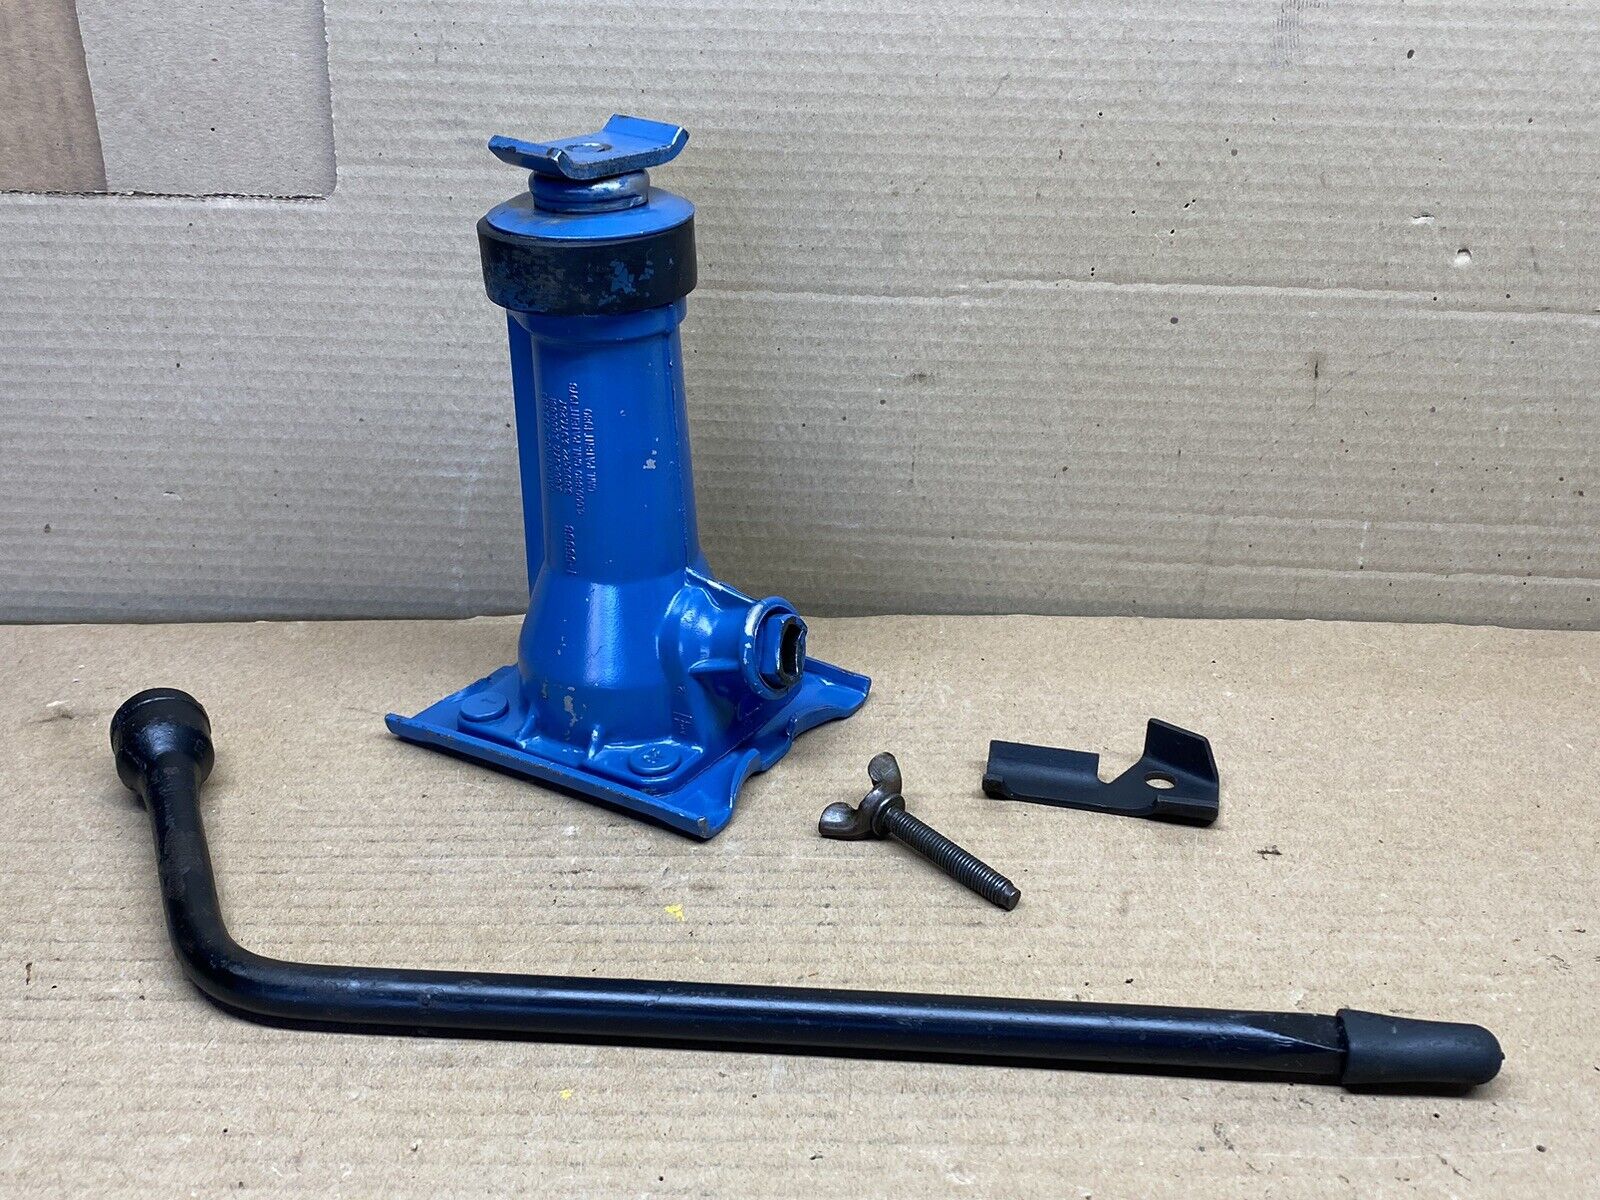 1986 FORD BRONCO II JACK BOTTLE WITH LUG WRENCH TESTED WORKING CONDITION